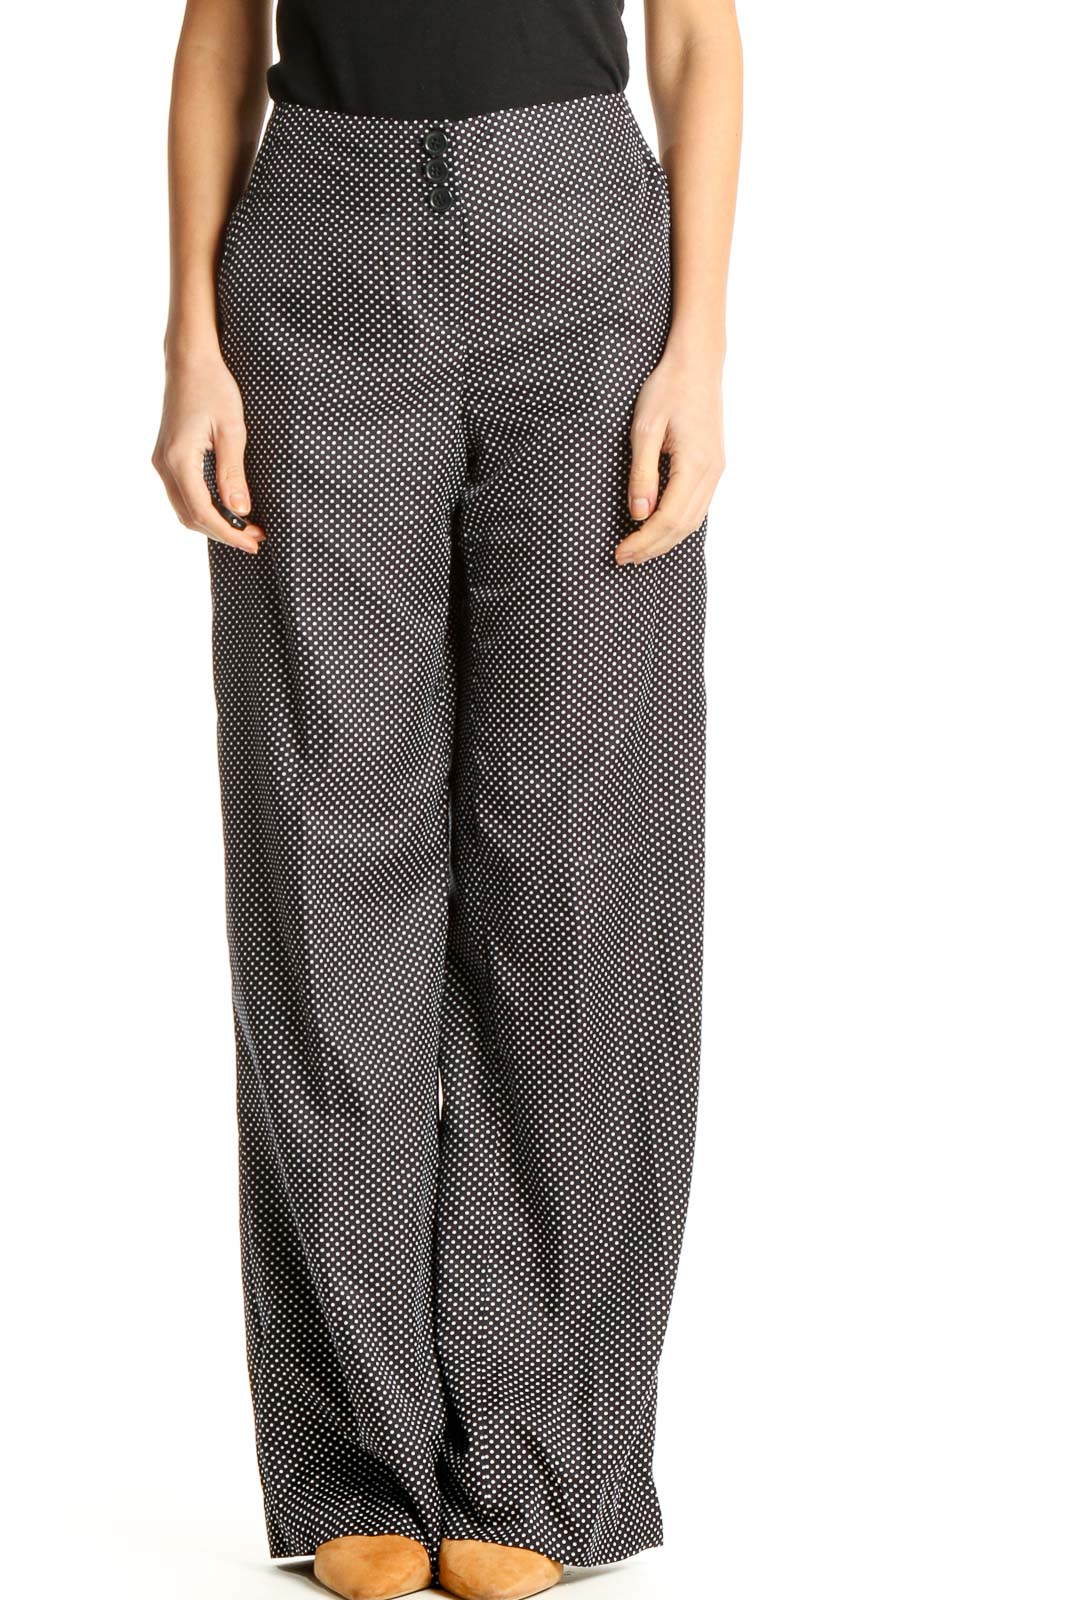 Black Polka Dot Casual Trousers Front